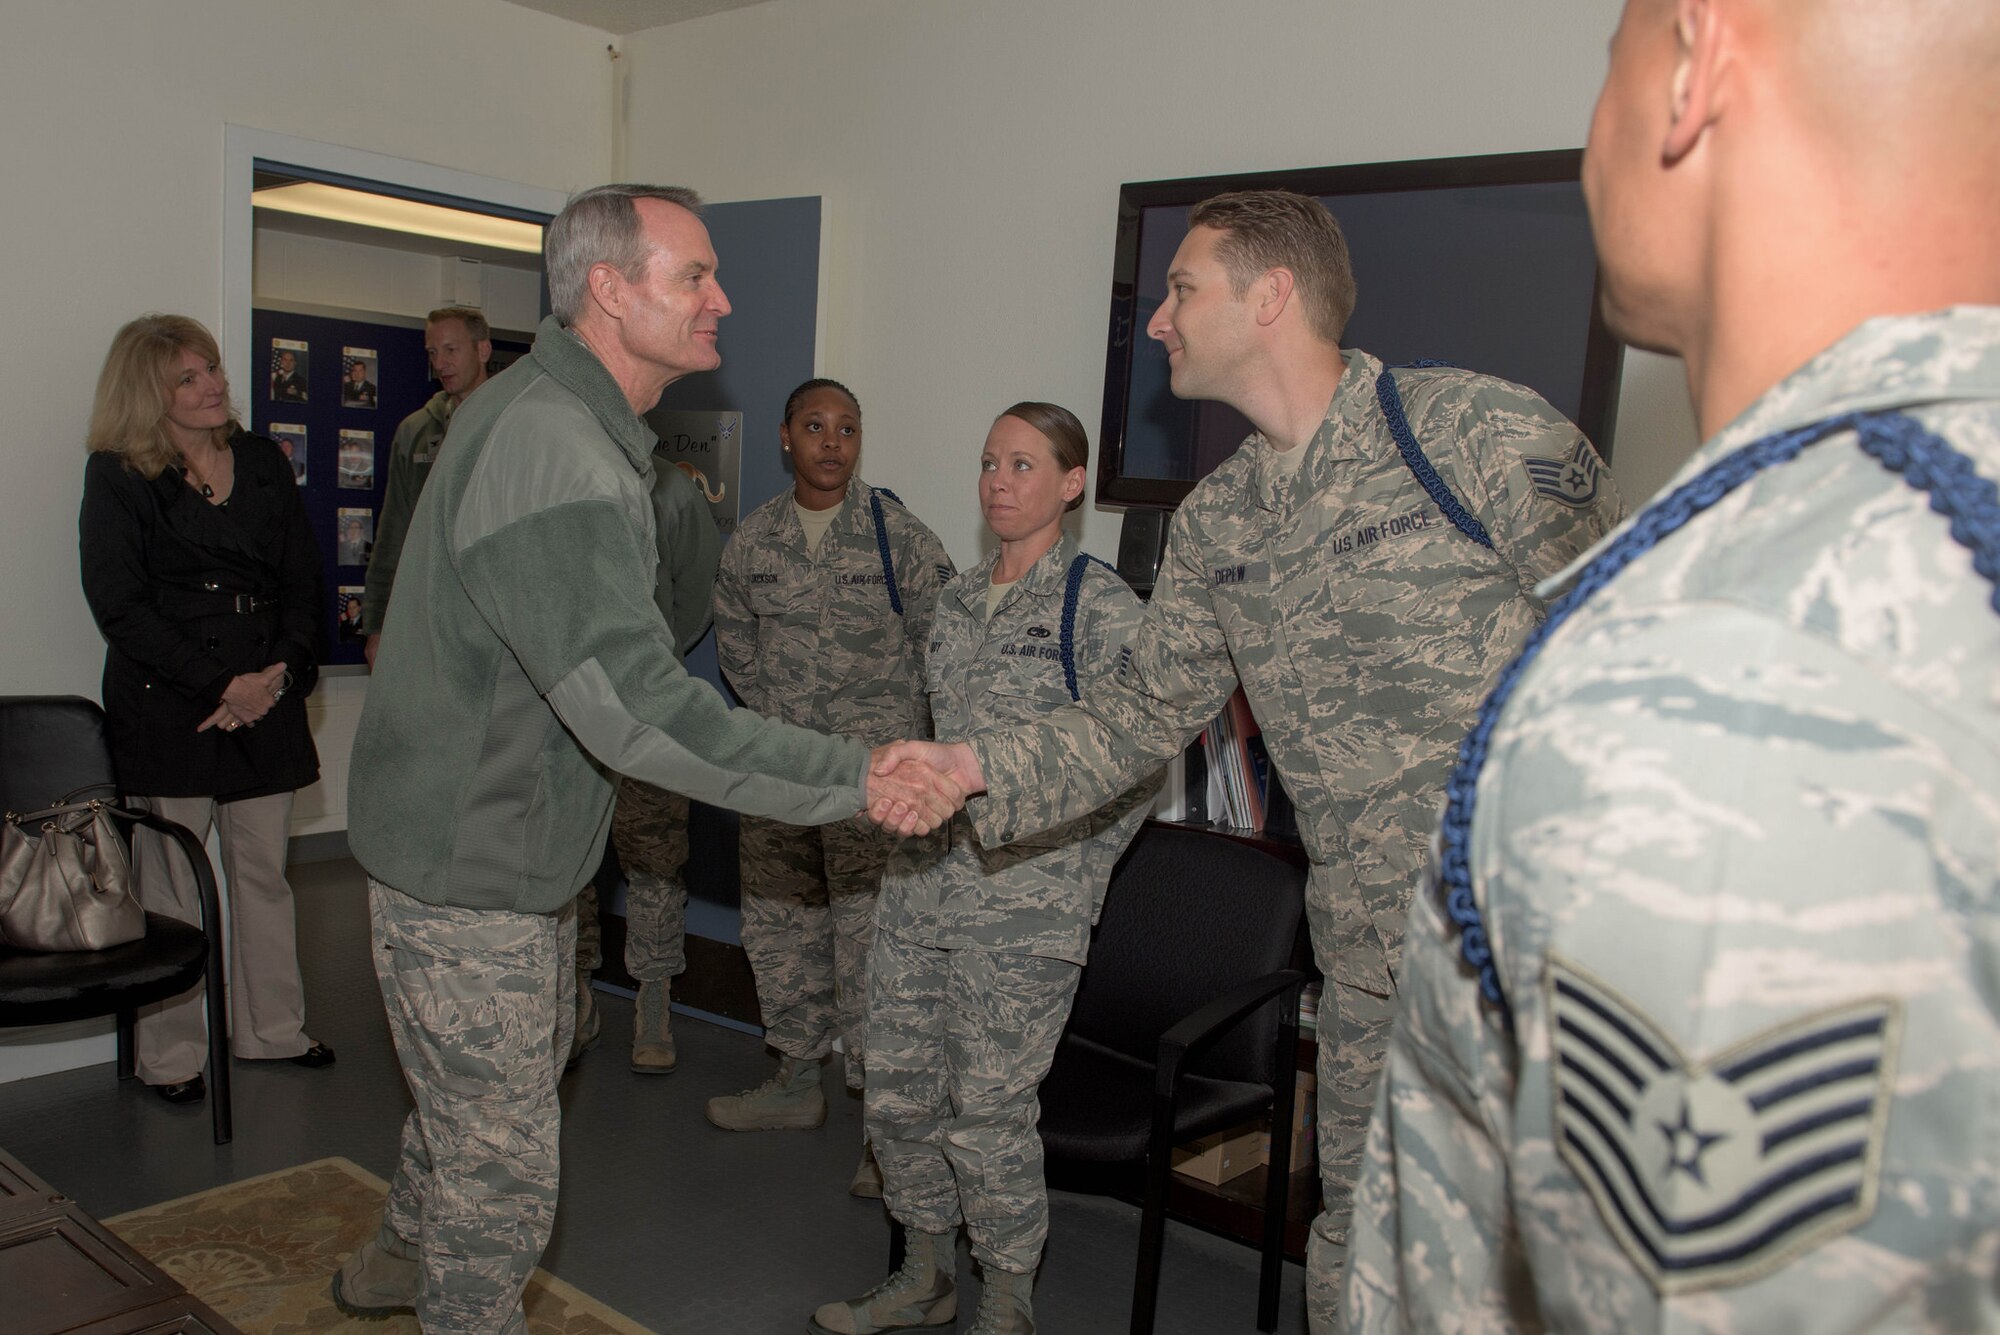 The commander of the Air Education and Training Command, Lt. Gen Darryl Roberson, visit Airmen at the Defense Language Institute Foreign Language Center as a part of a tour of installations that he oversees. (U.S. Army photo by Amber Whittington) 